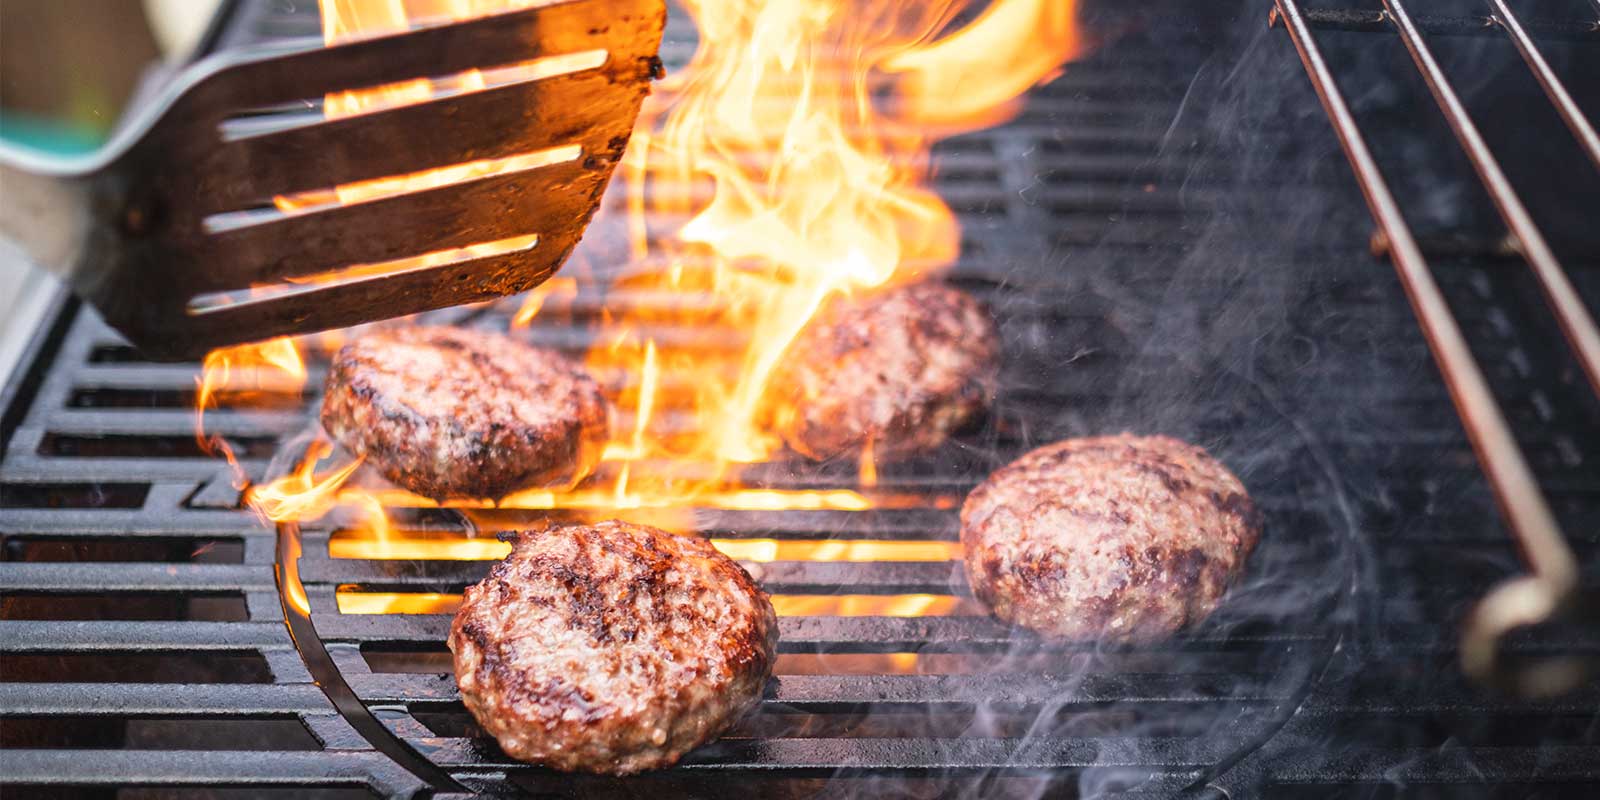 Sizzling Burger on the Grill